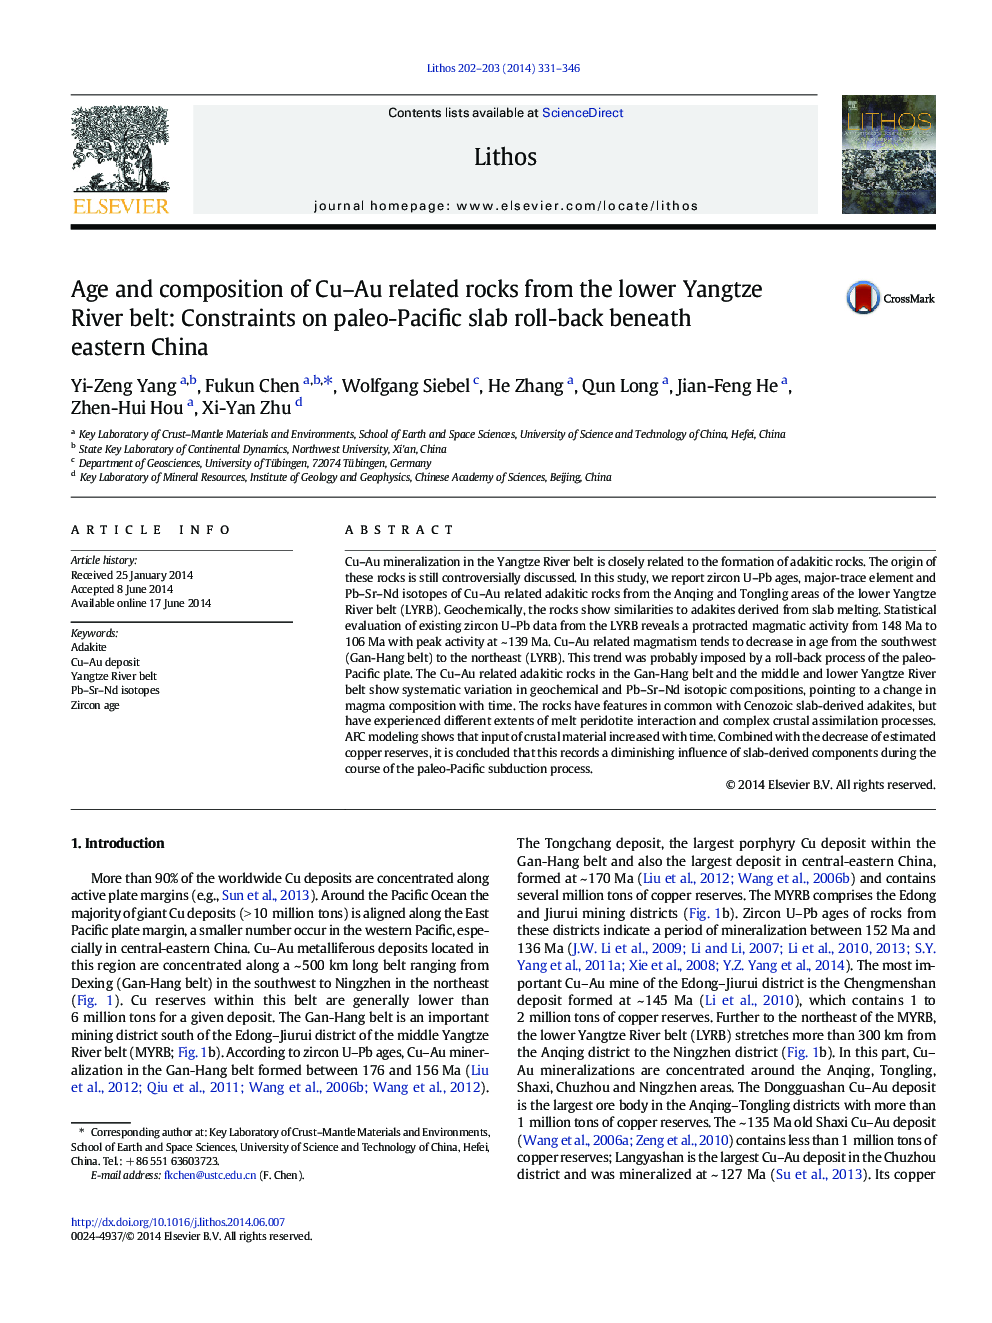 Age and composition of Cu–Au related rocks from the lower Yangtze River belt: Constraints on paleo-Pacific slab roll-back beneath eastern China